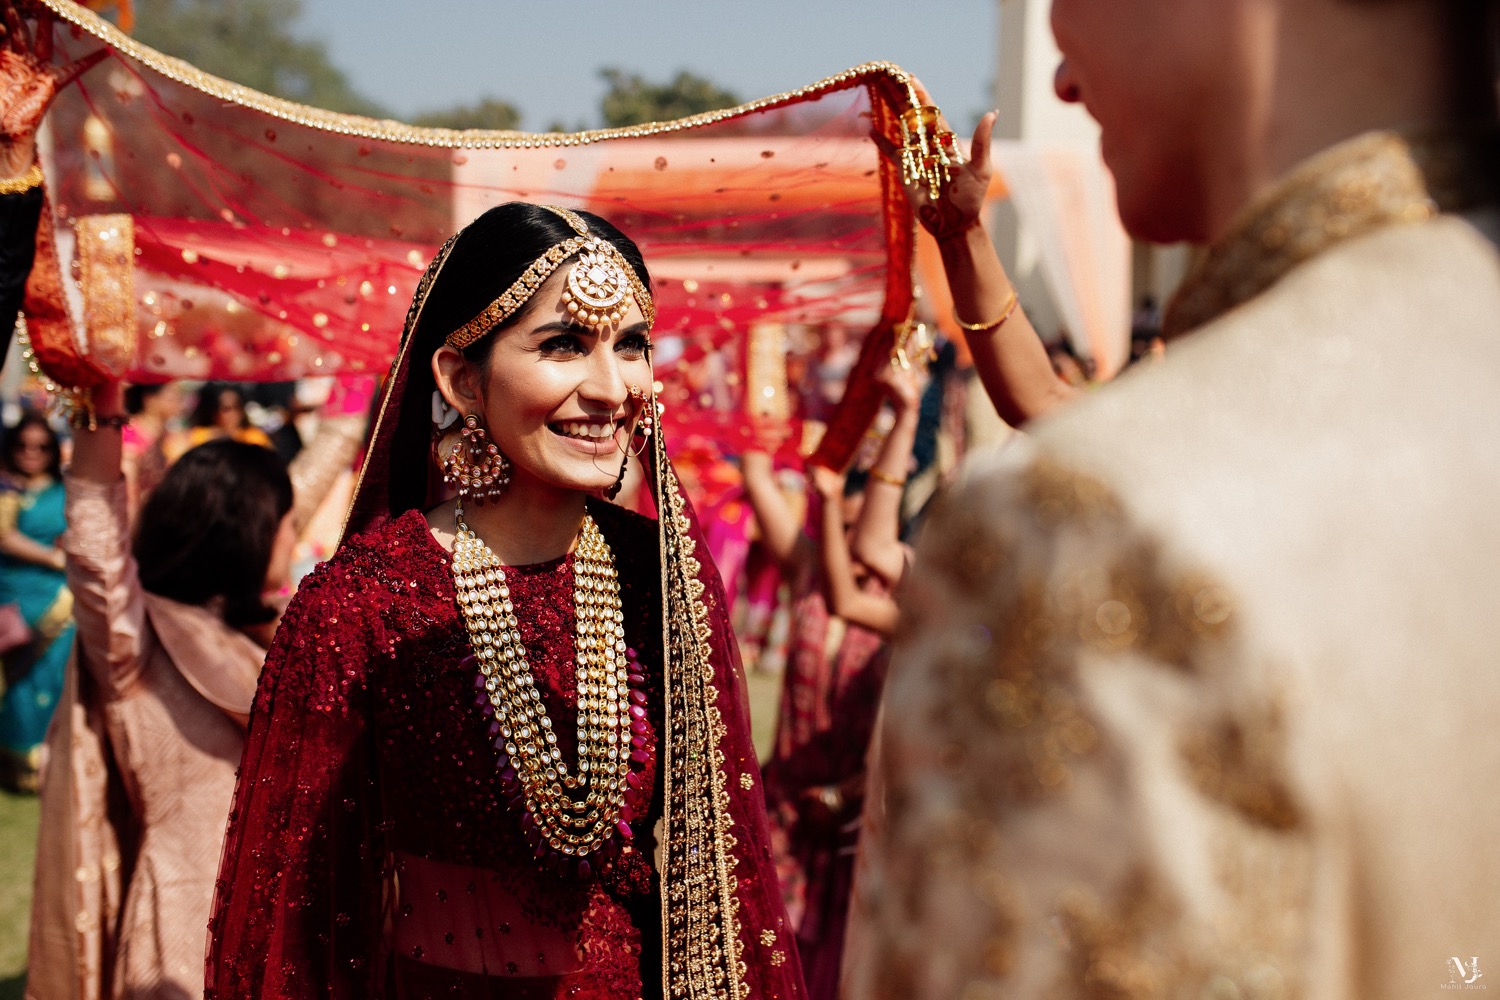 sabyasachi lehenga on rent Archives - Get Inspiring Ideas for Planning Your  Perfect Wedding at fabweddings